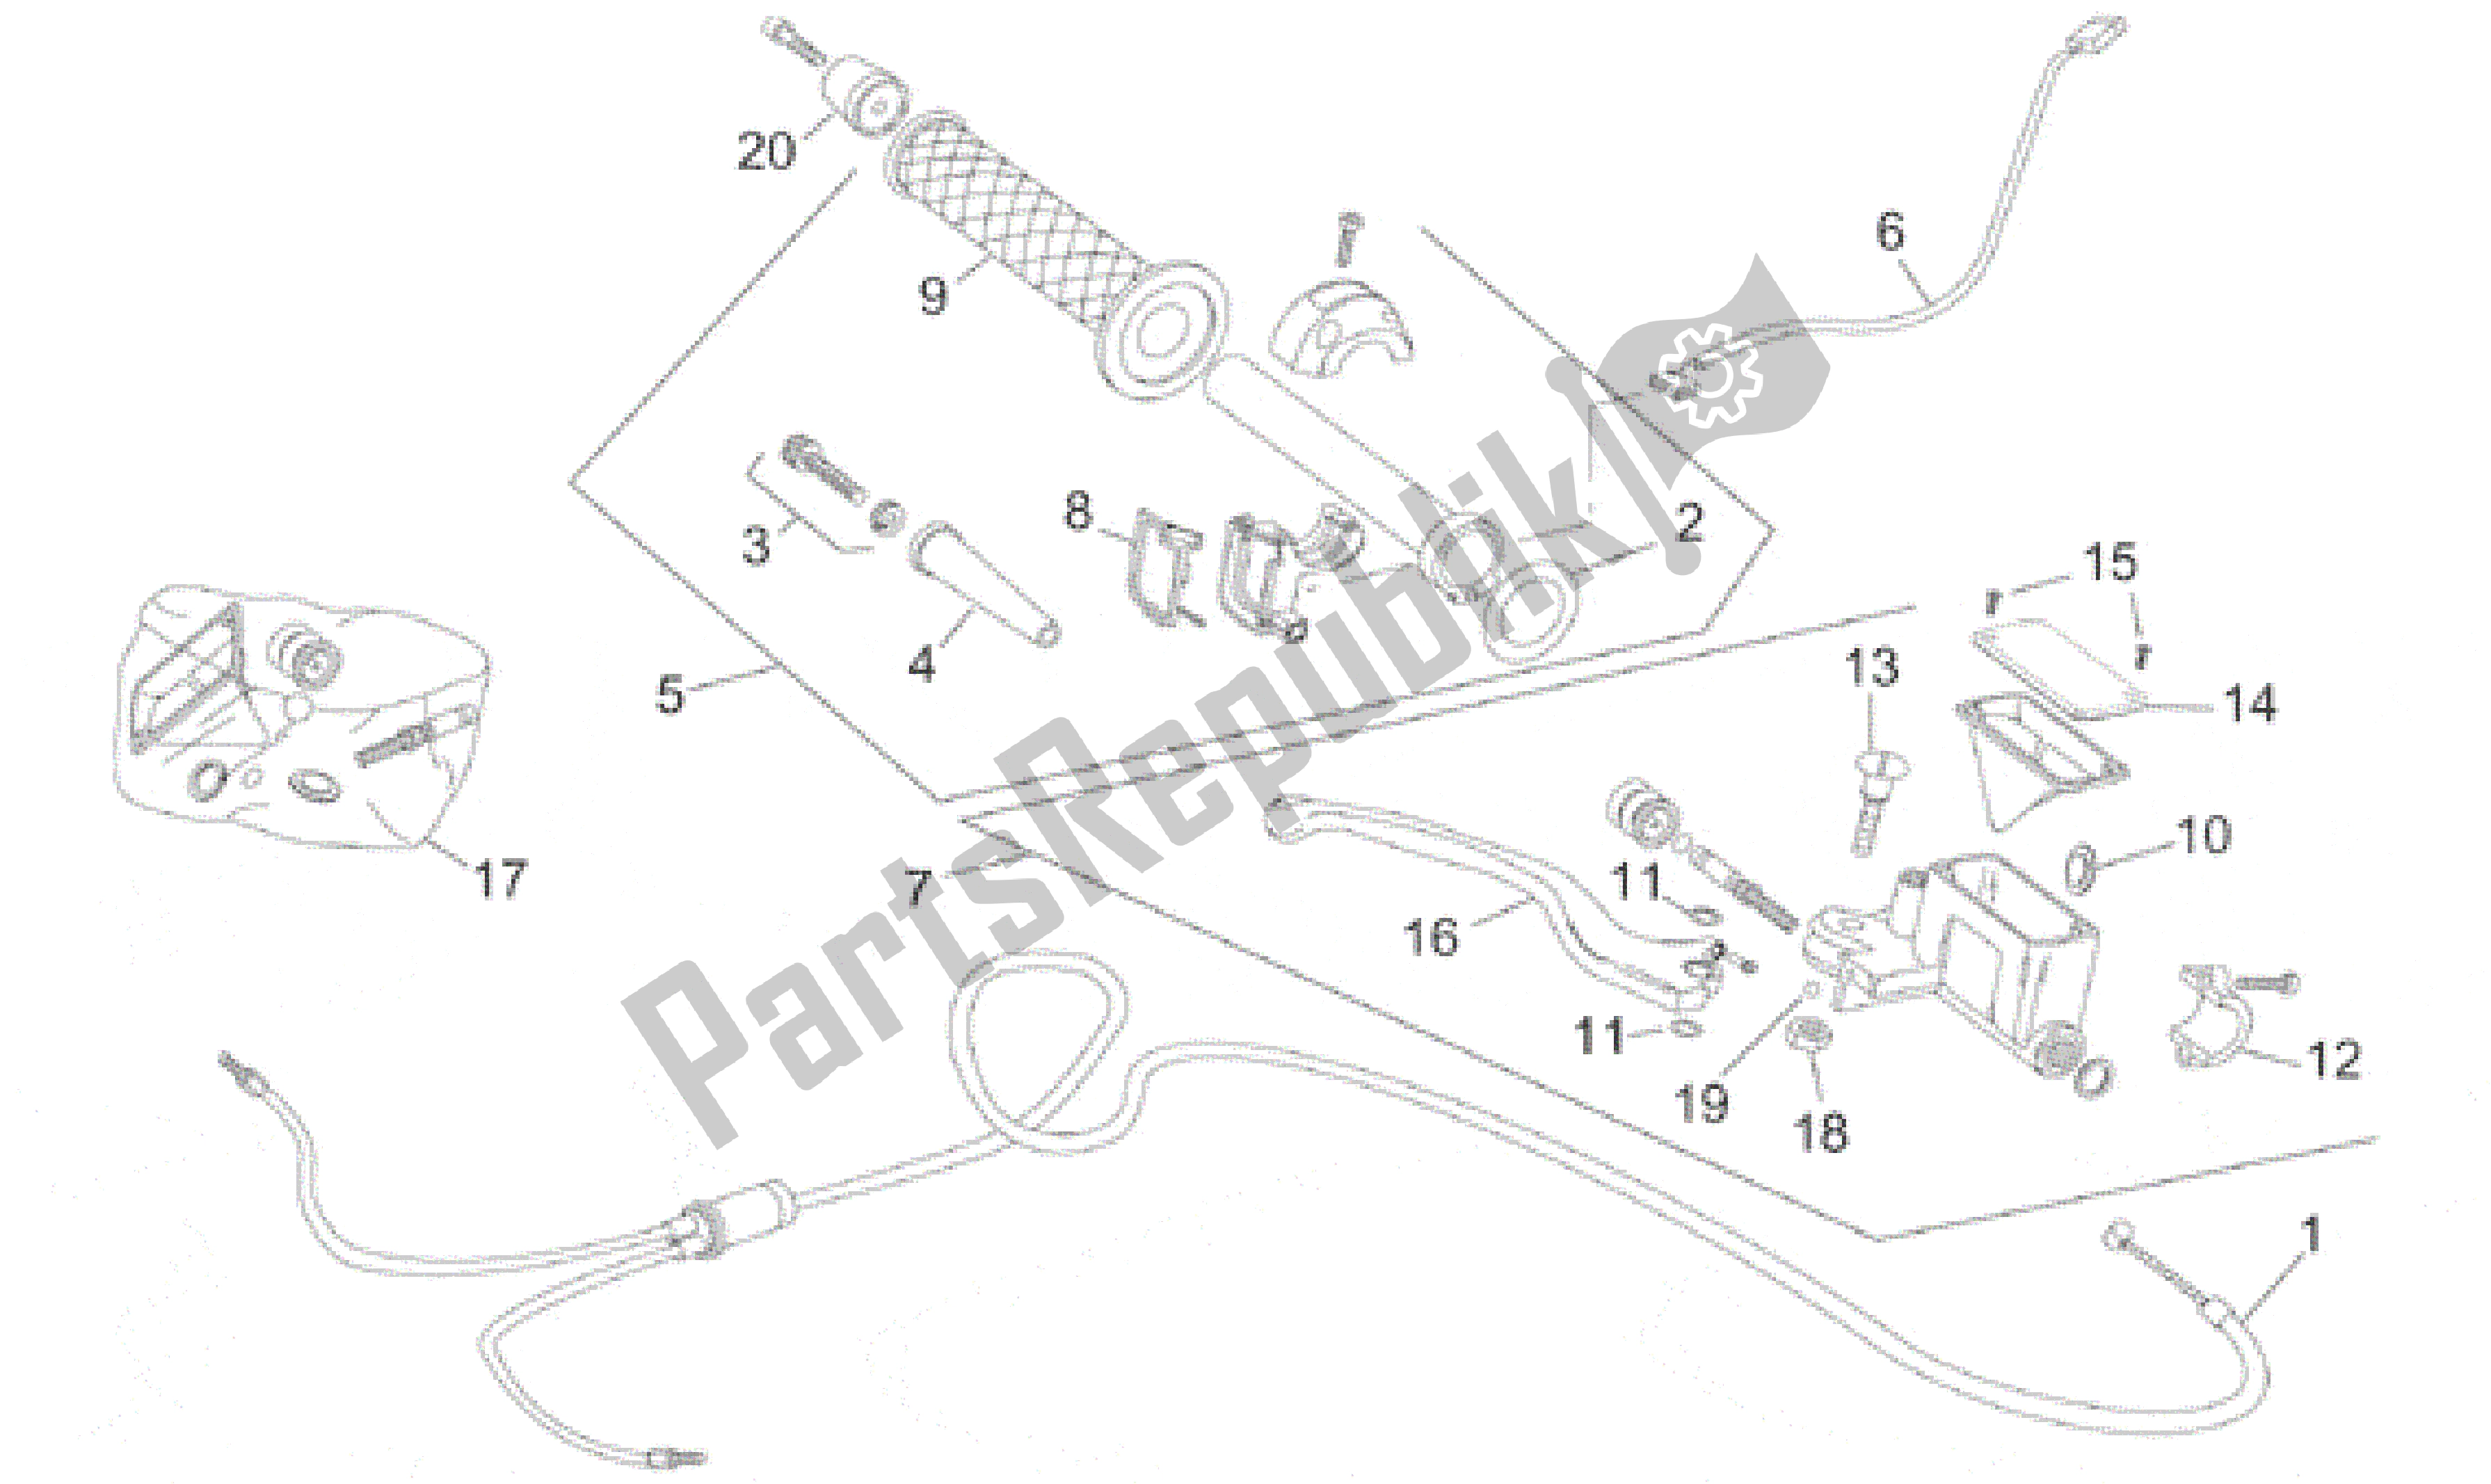 All parts for the Rh Controls of the Aprilia RS 50 1996 - 1998